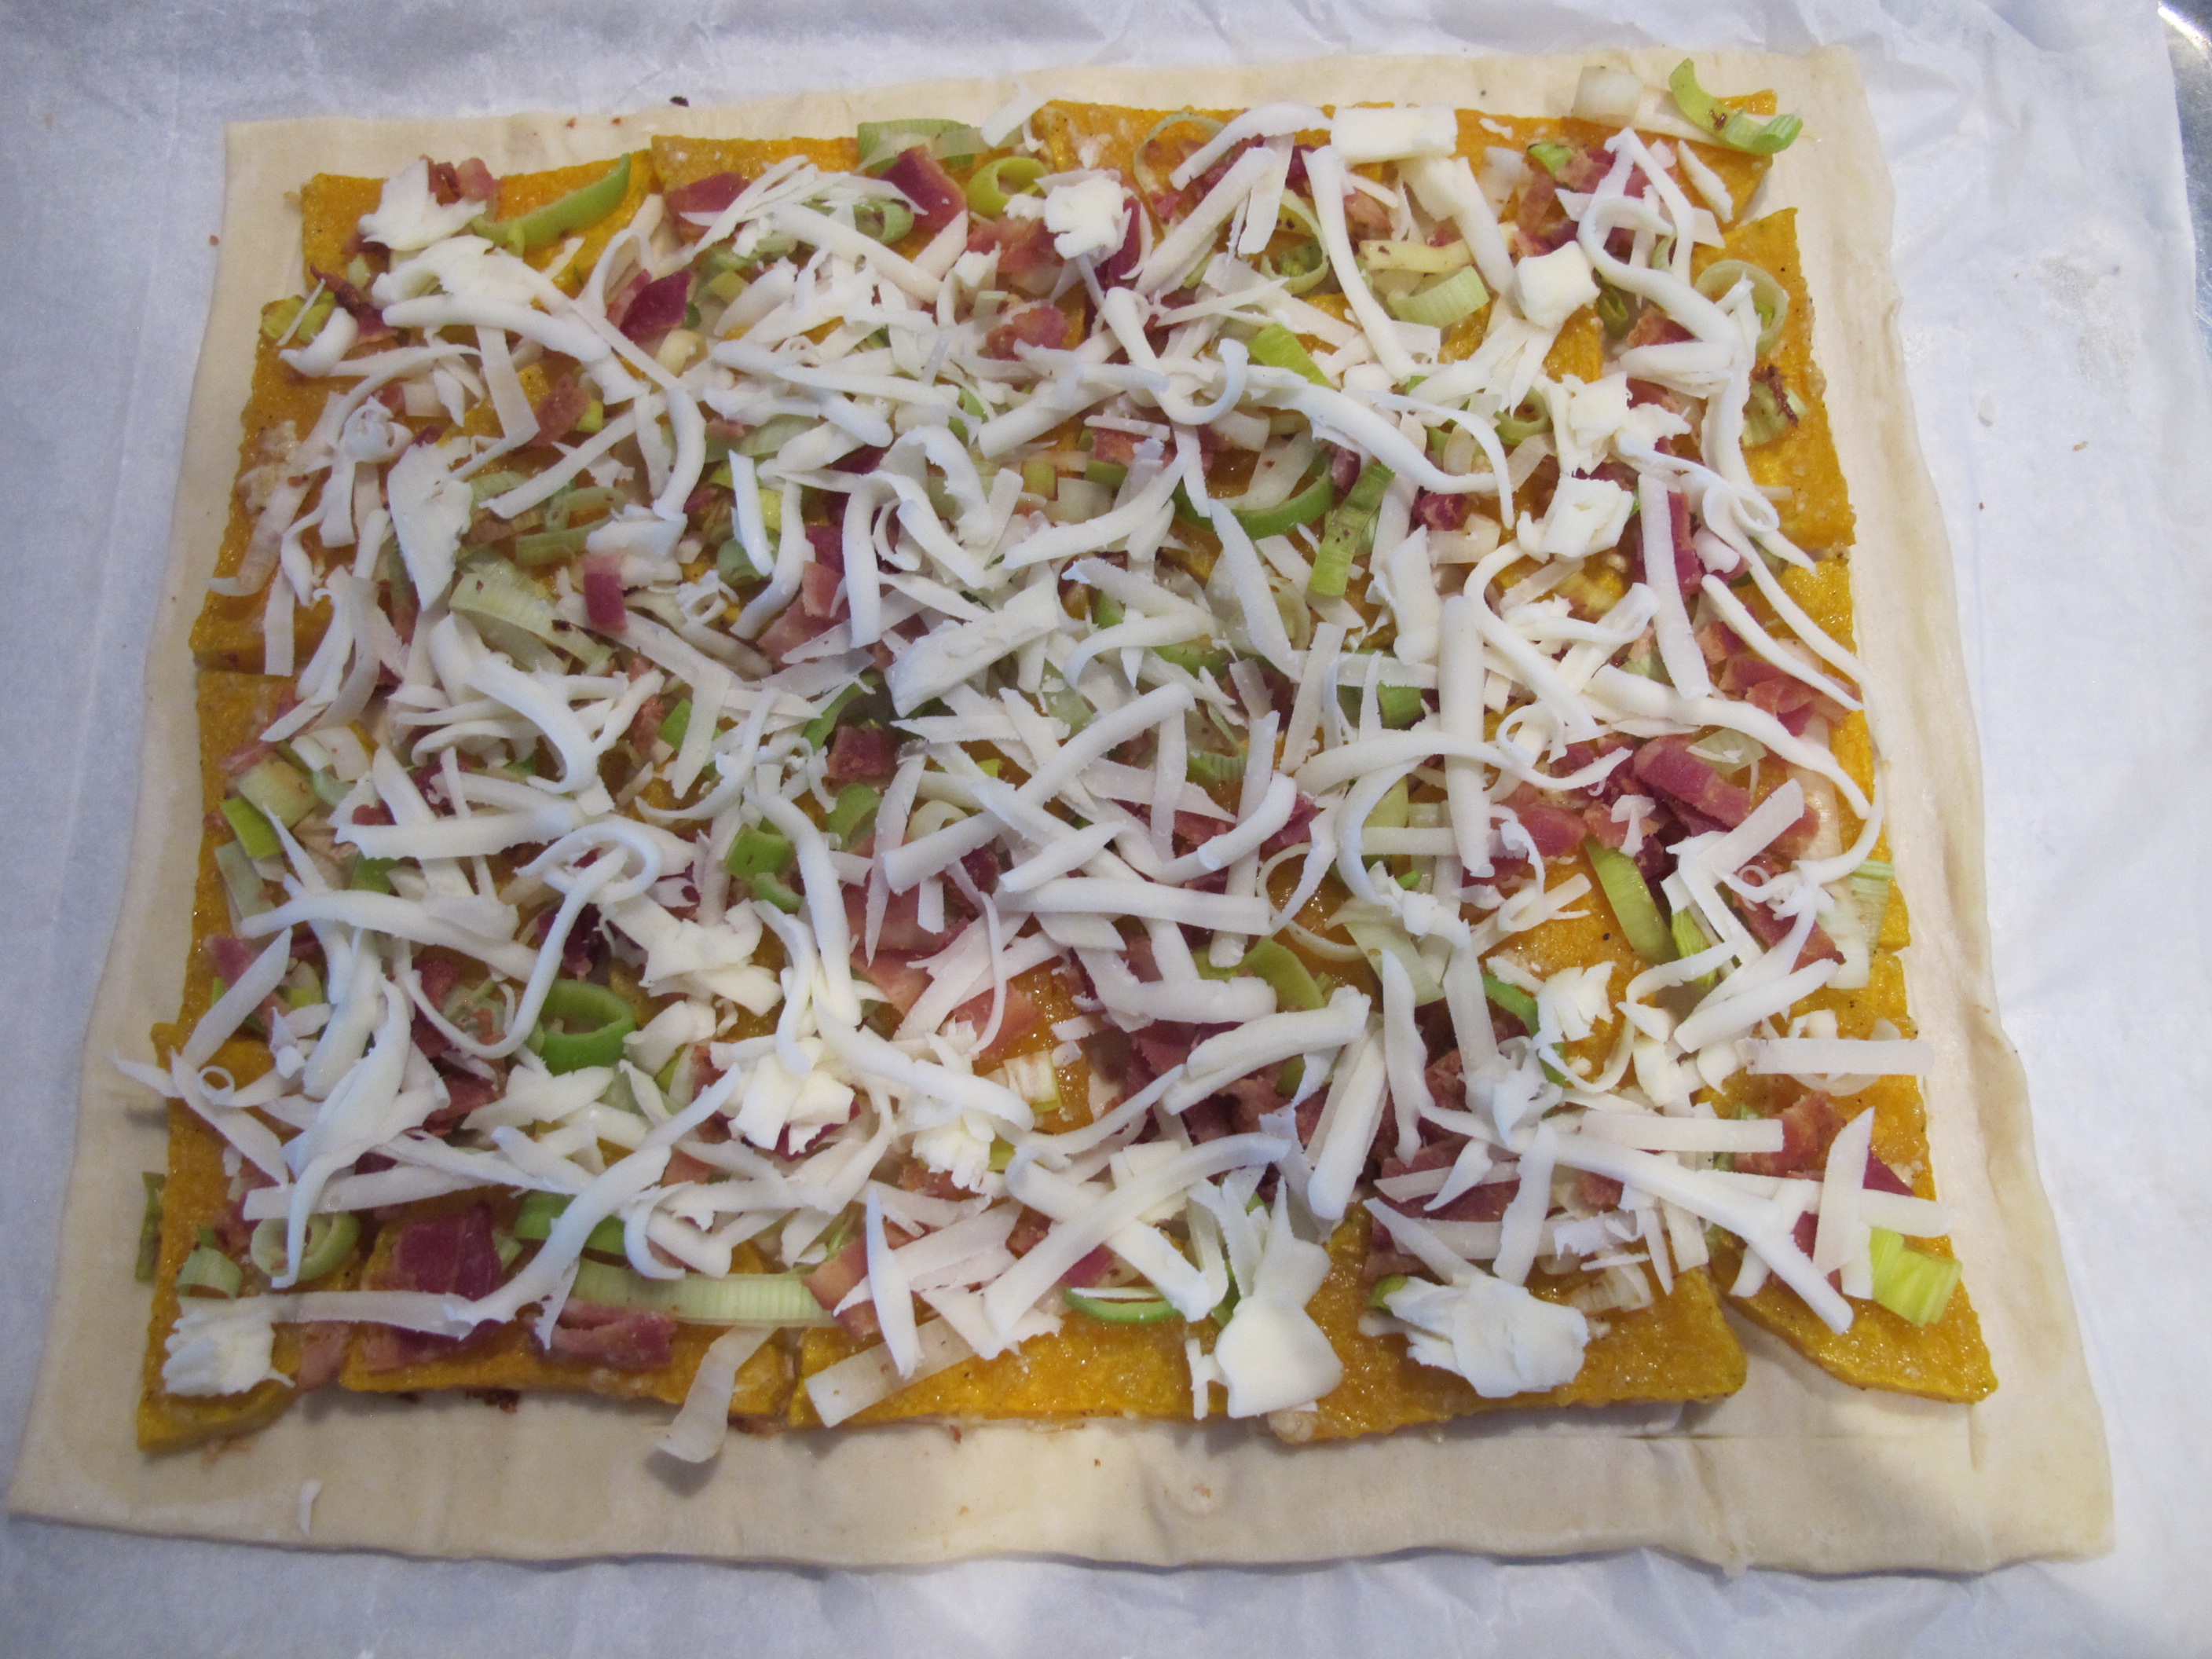 Roasted Squash Tart with Bacon & Cheese